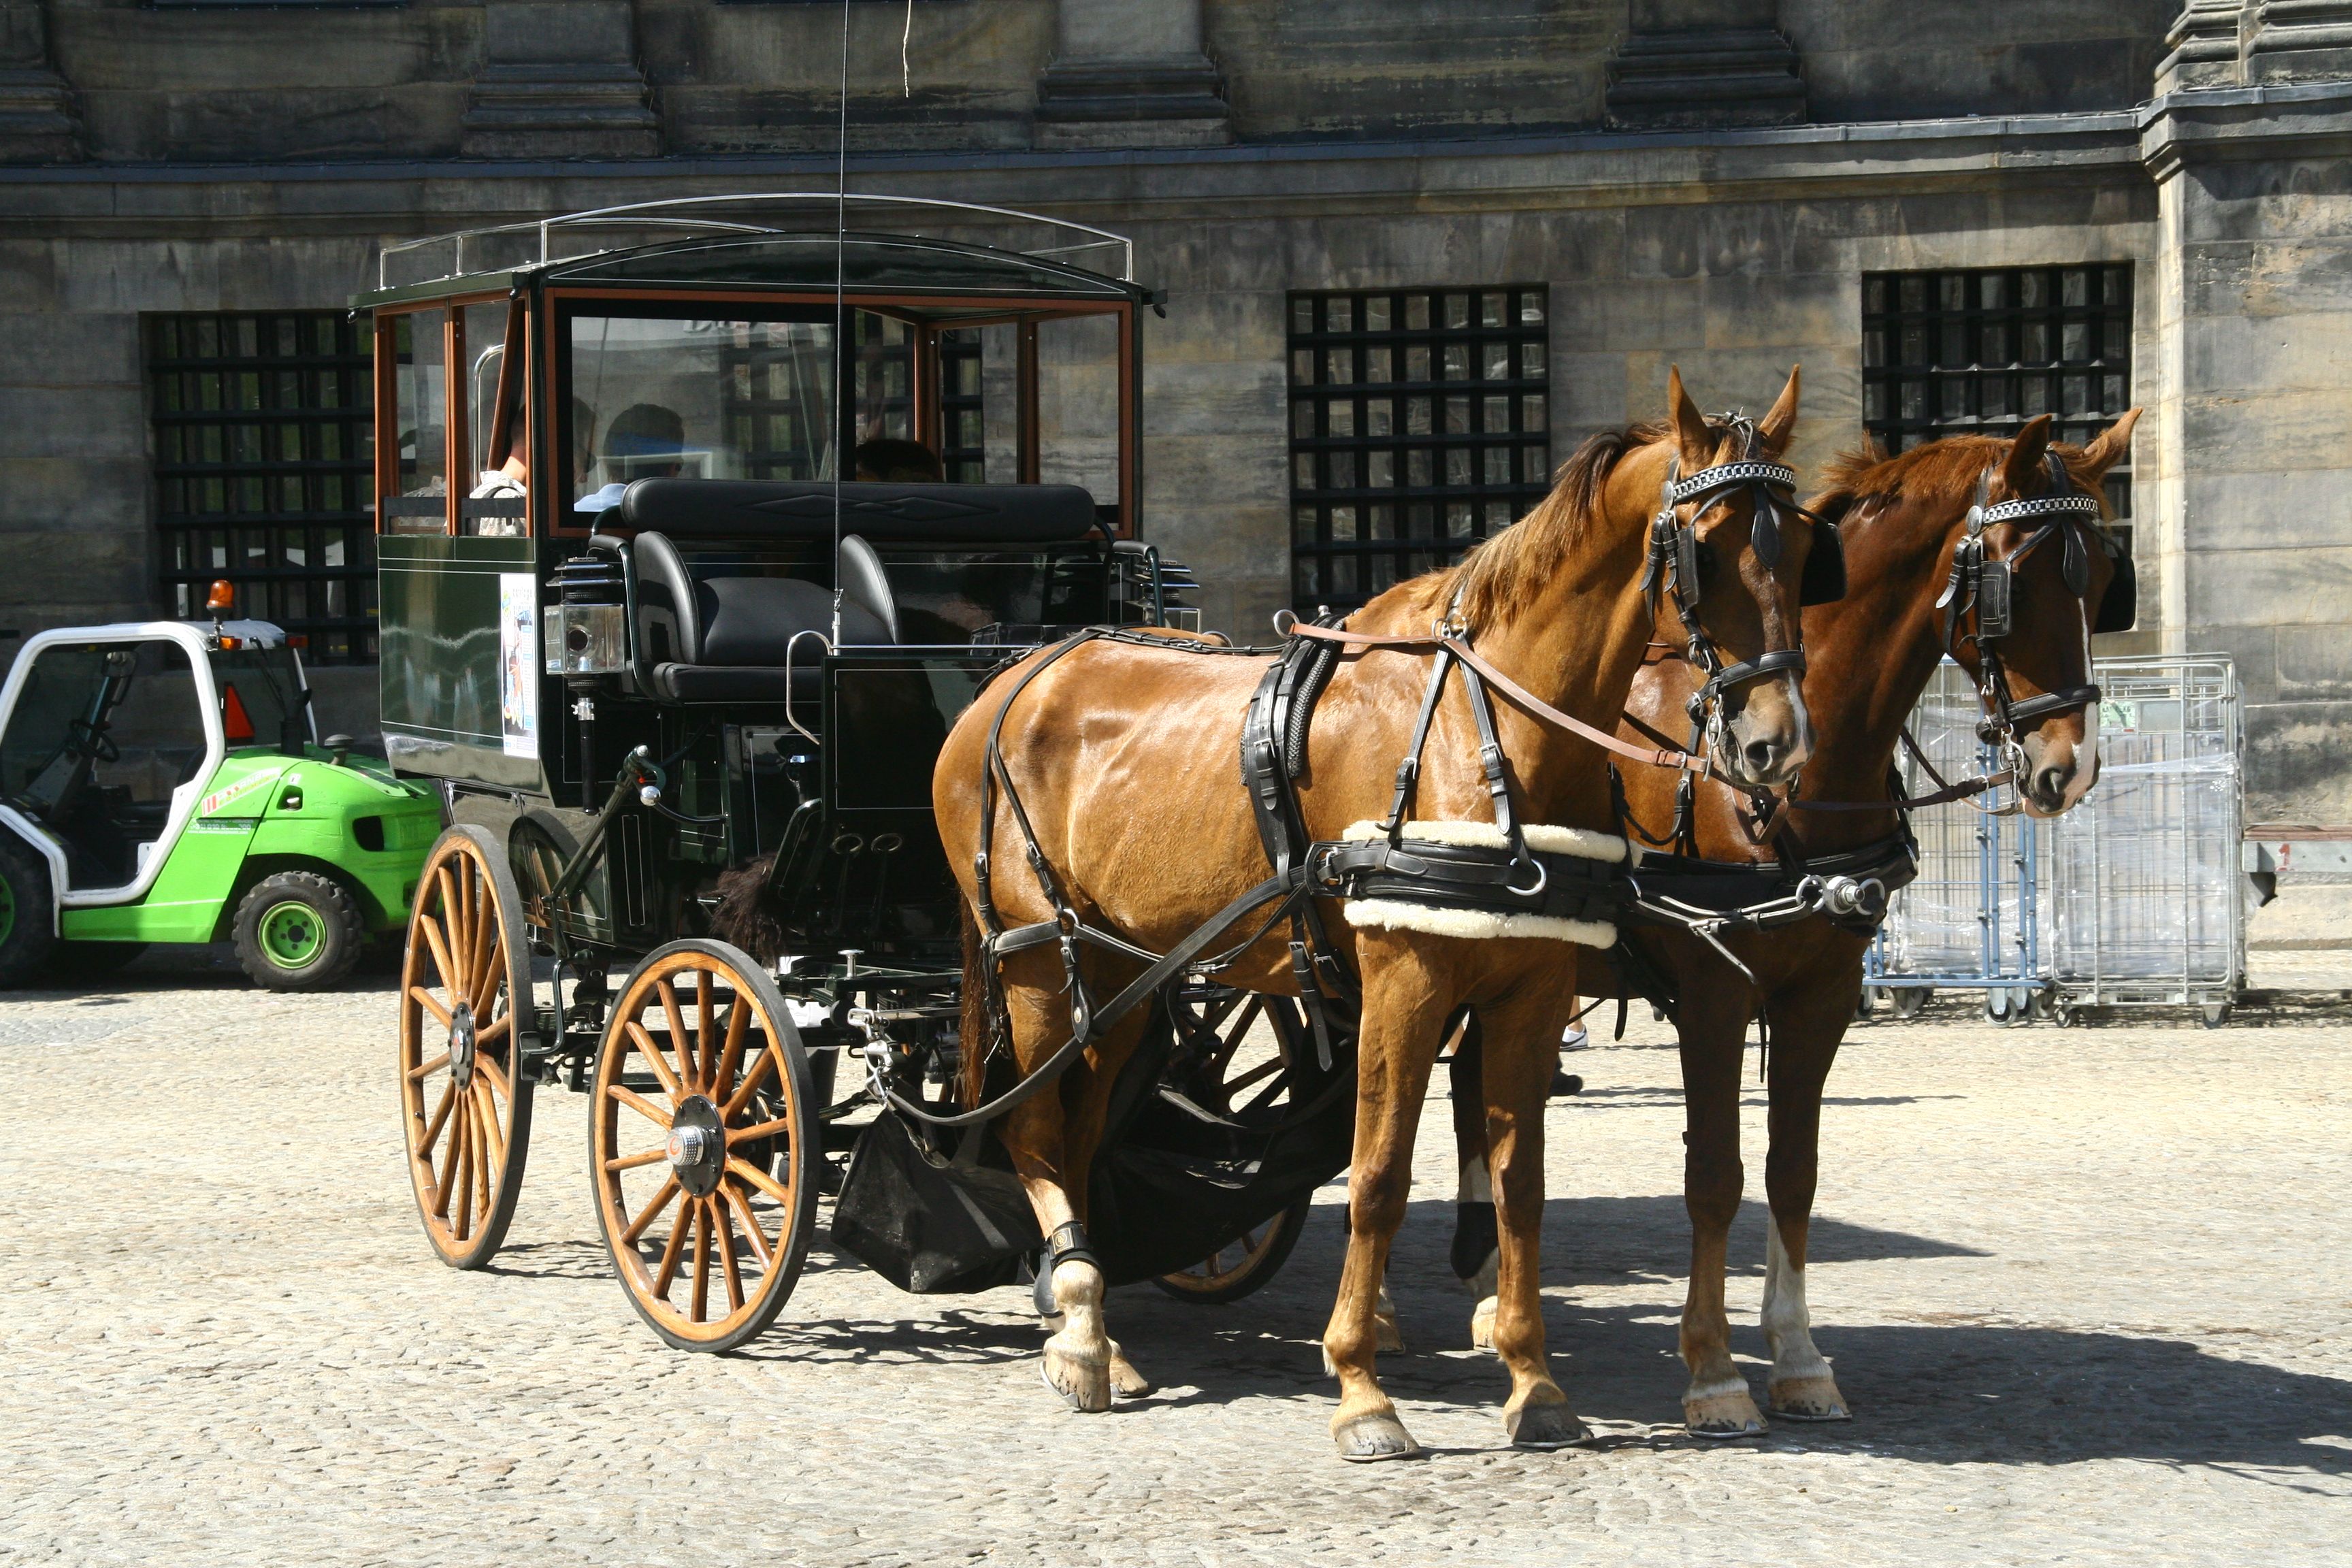 Carriages - Google Search | Carriages | Pinterest